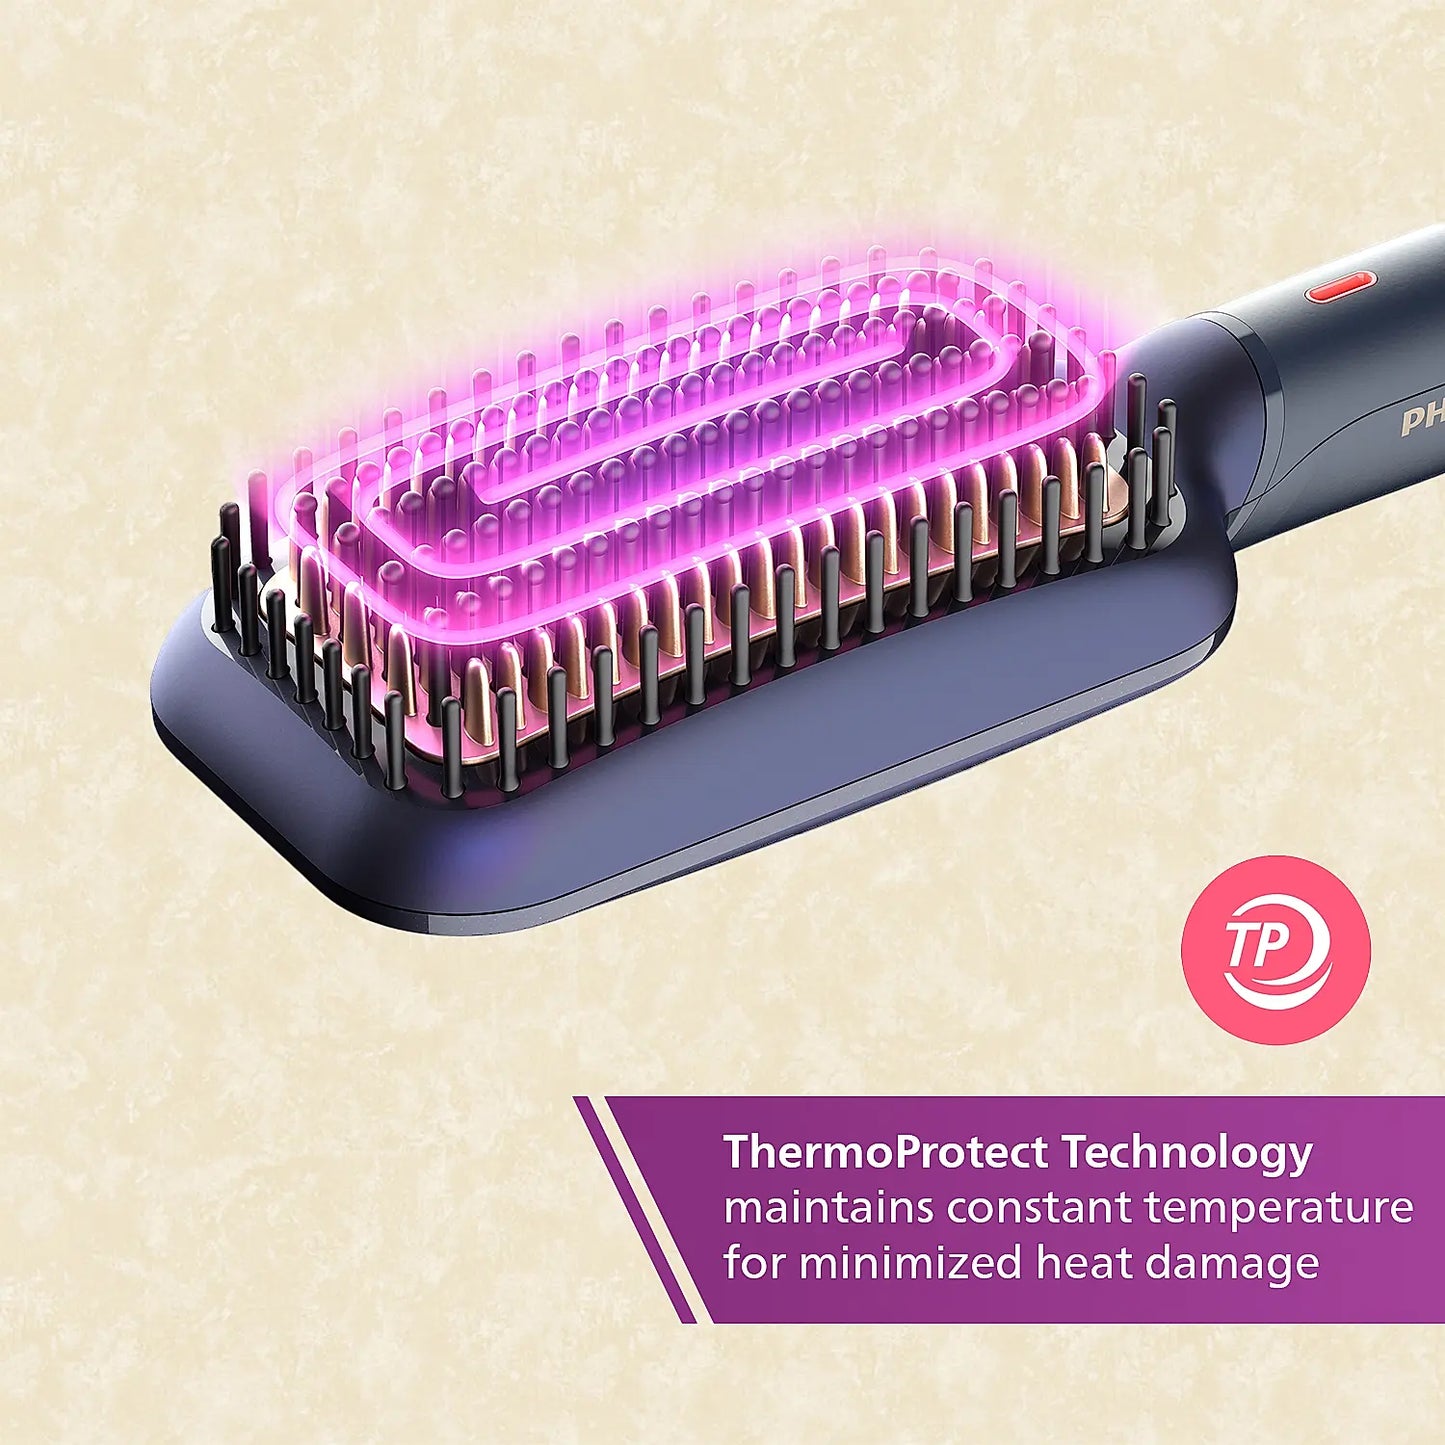 PHILIPS Hair Straightening Brush With Silkprotect Technology Philips